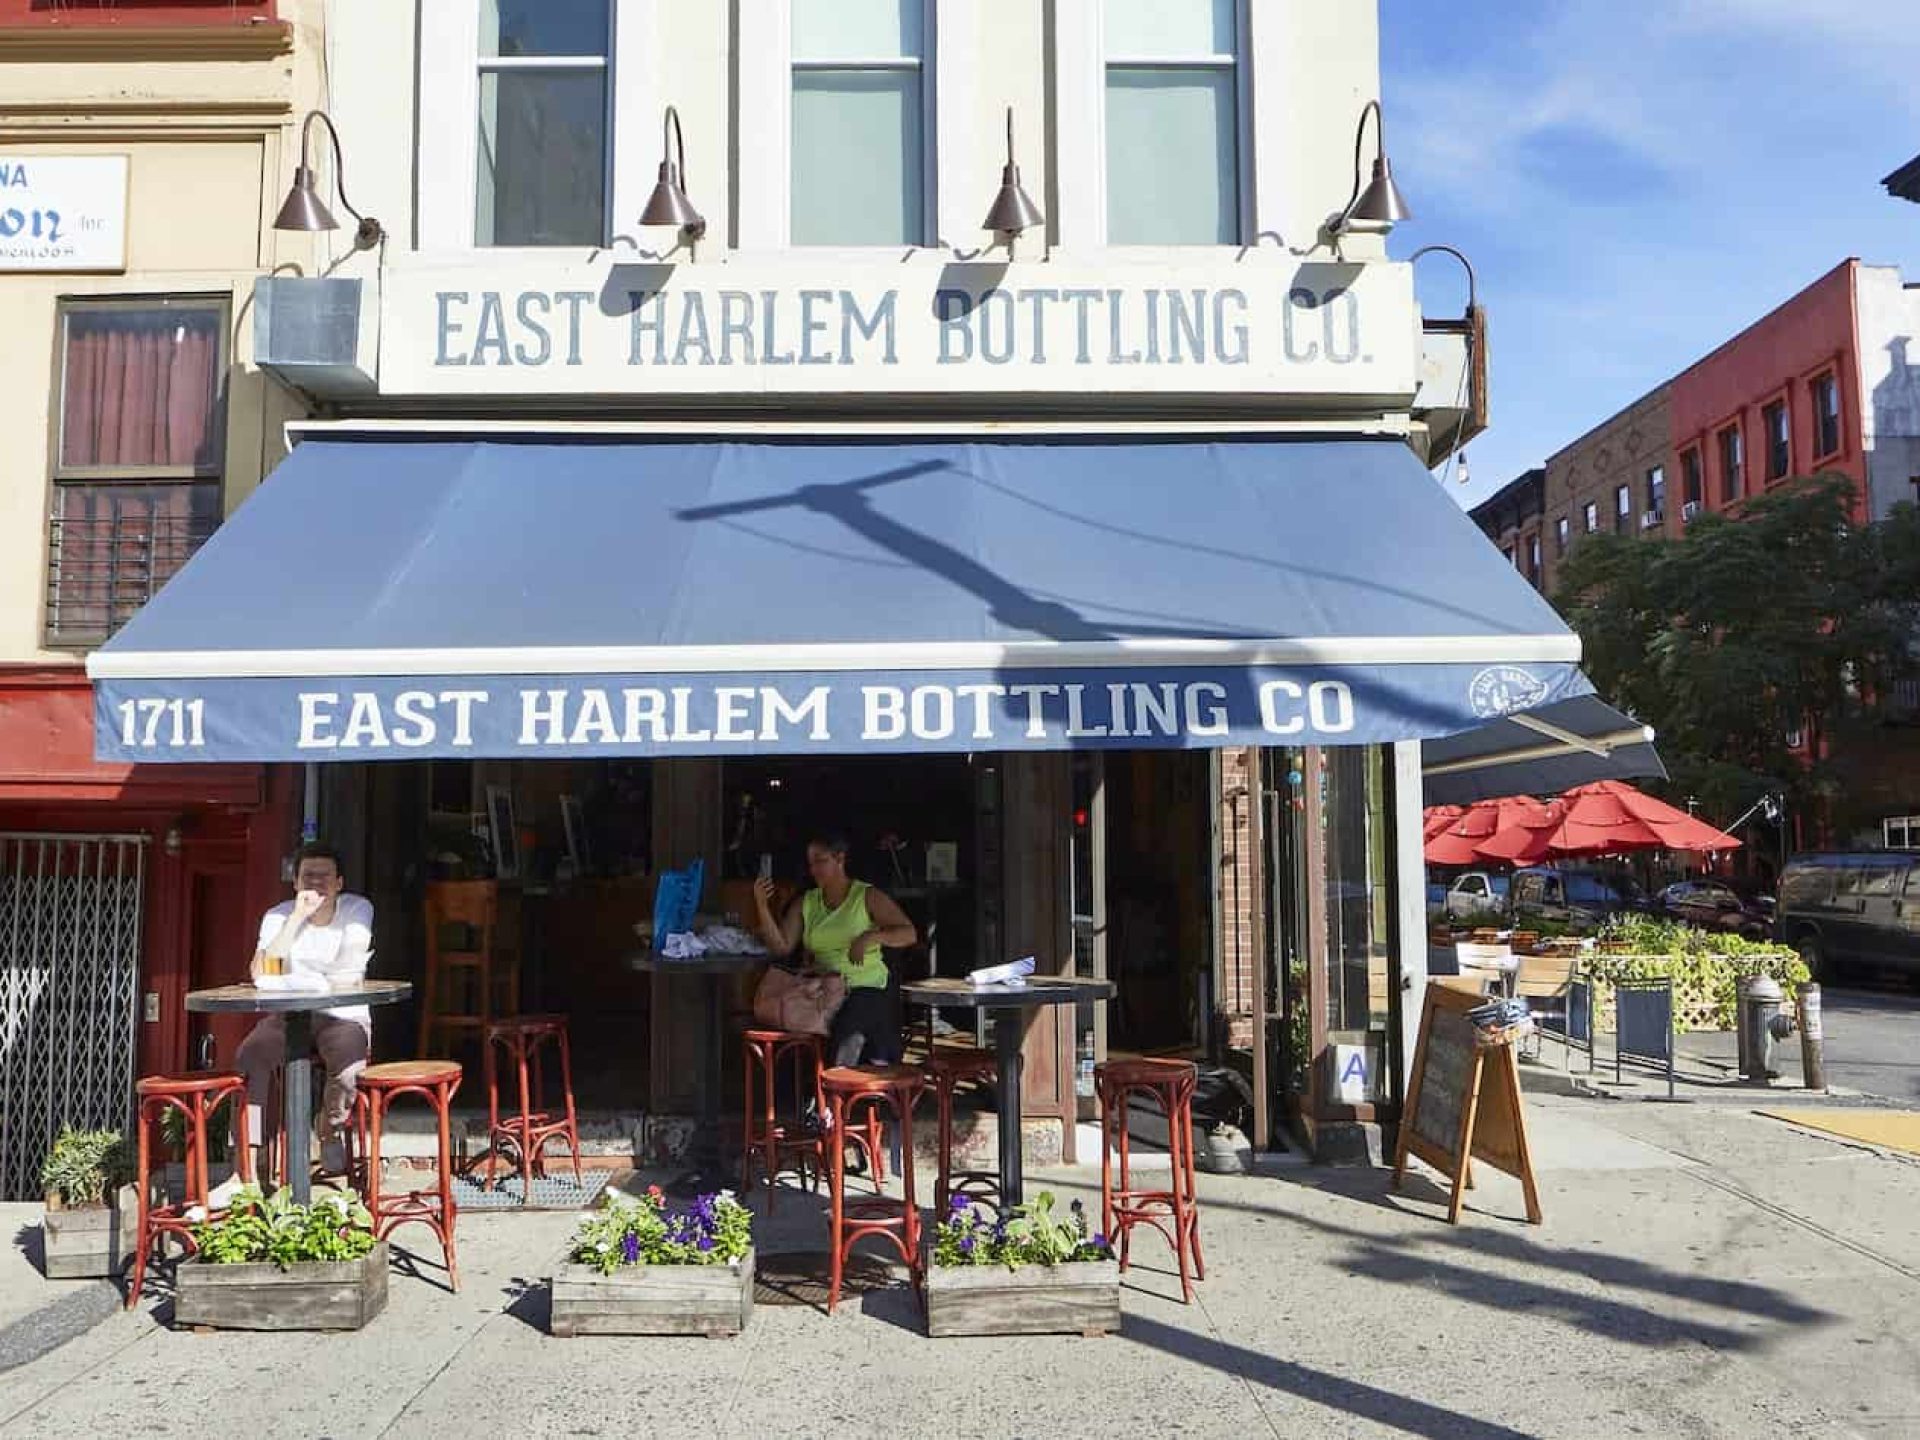 Exterior of East Harlem Bottling Co. in New York. Floor corner unit with a blue canopy, outdoor seating area and open doors.